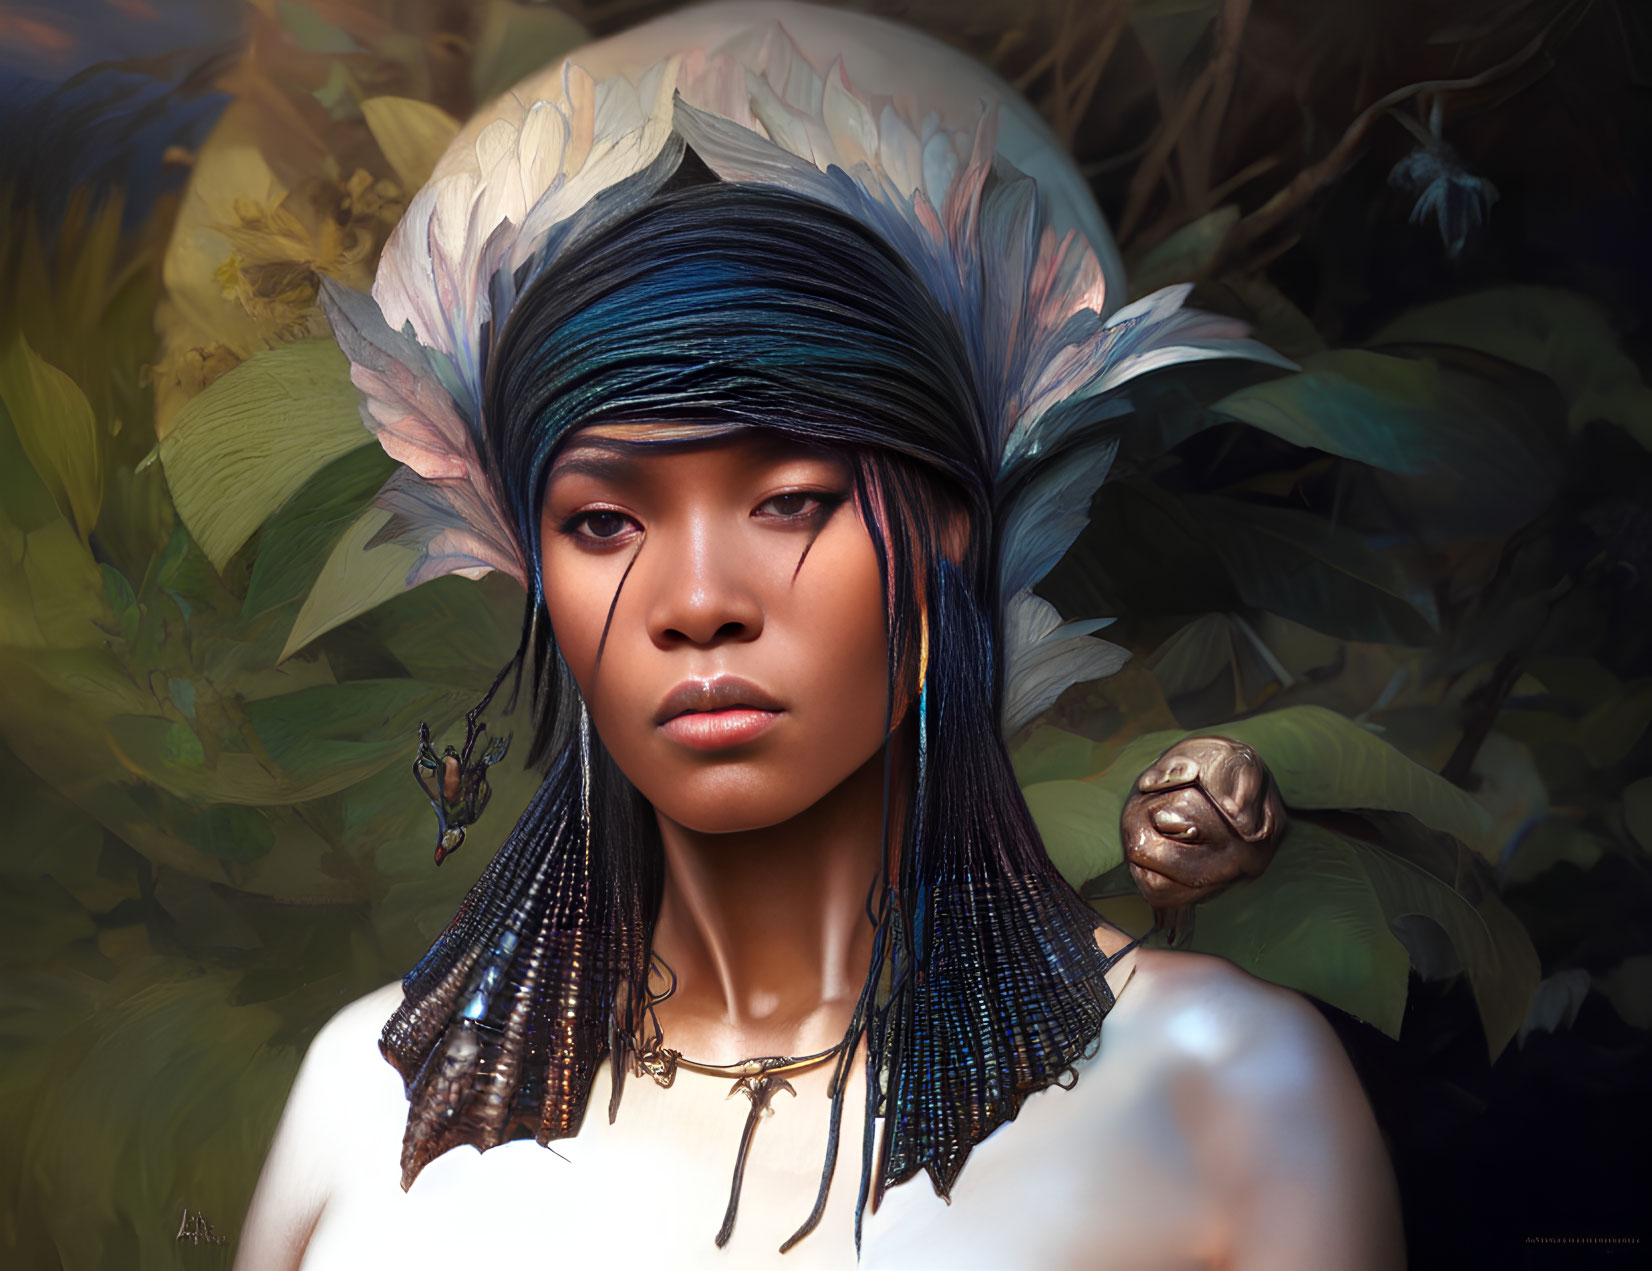 Portrait of Woman with Blue Headwrap and Feathered Headdress in Golden Jewelry